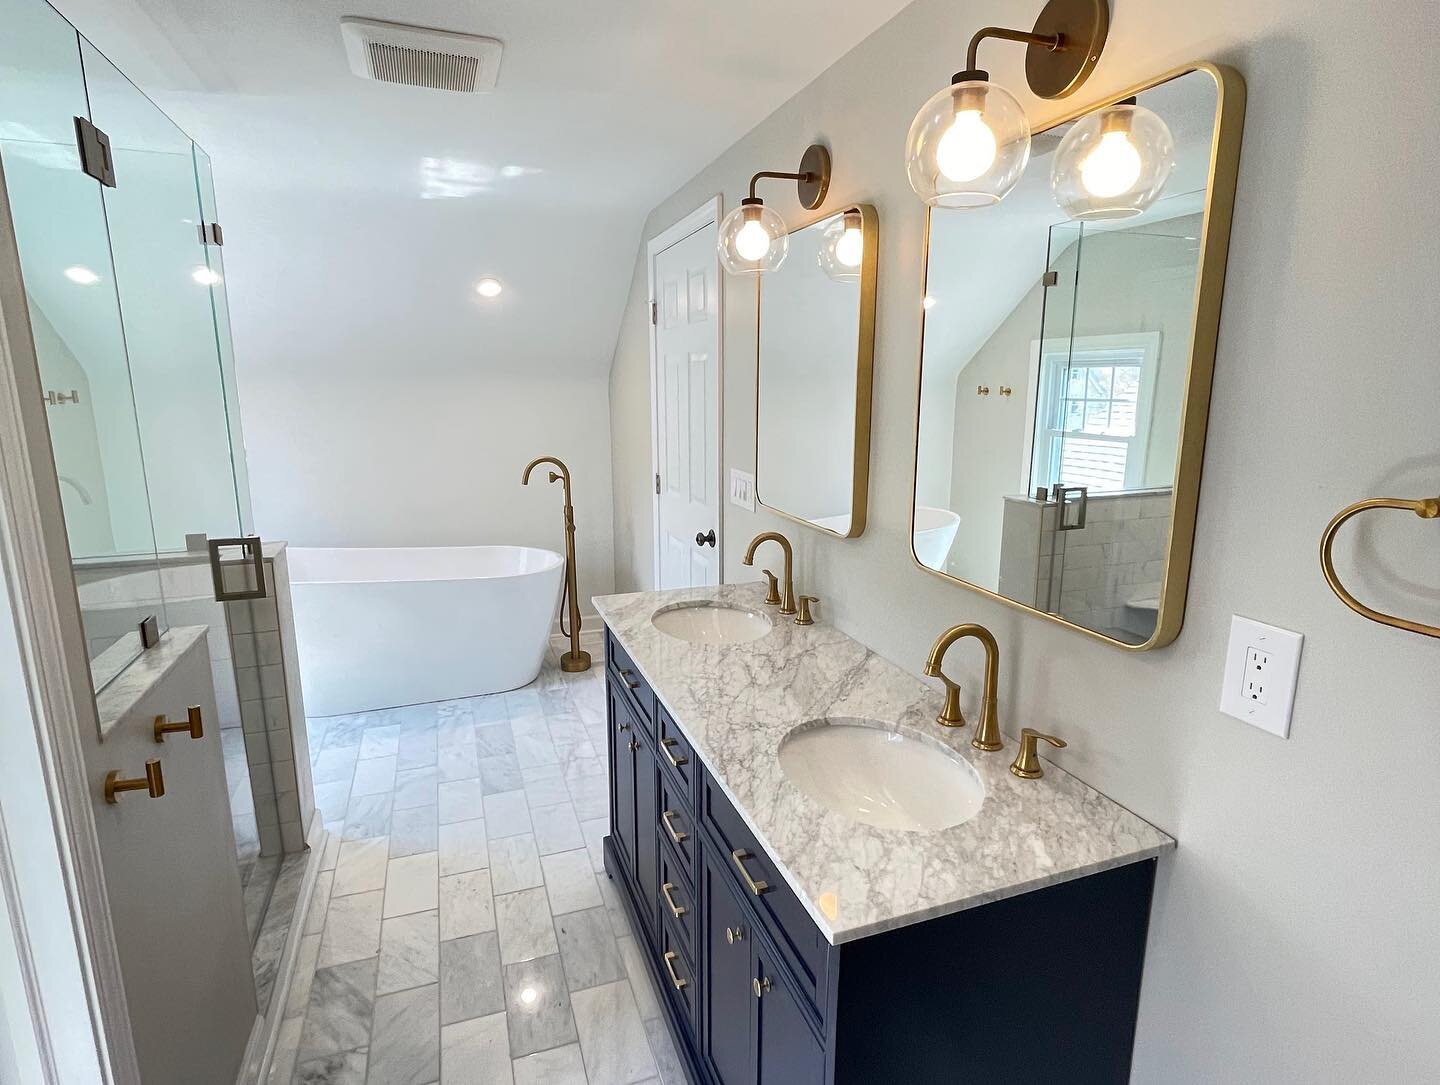 This project began with a large open third floor attic space that was transformed into a beautiful primary bedroom suite. This projected included a luxury on-suite bathroom with walk-in shower, water closet, double sink vanity and free standing tub. 